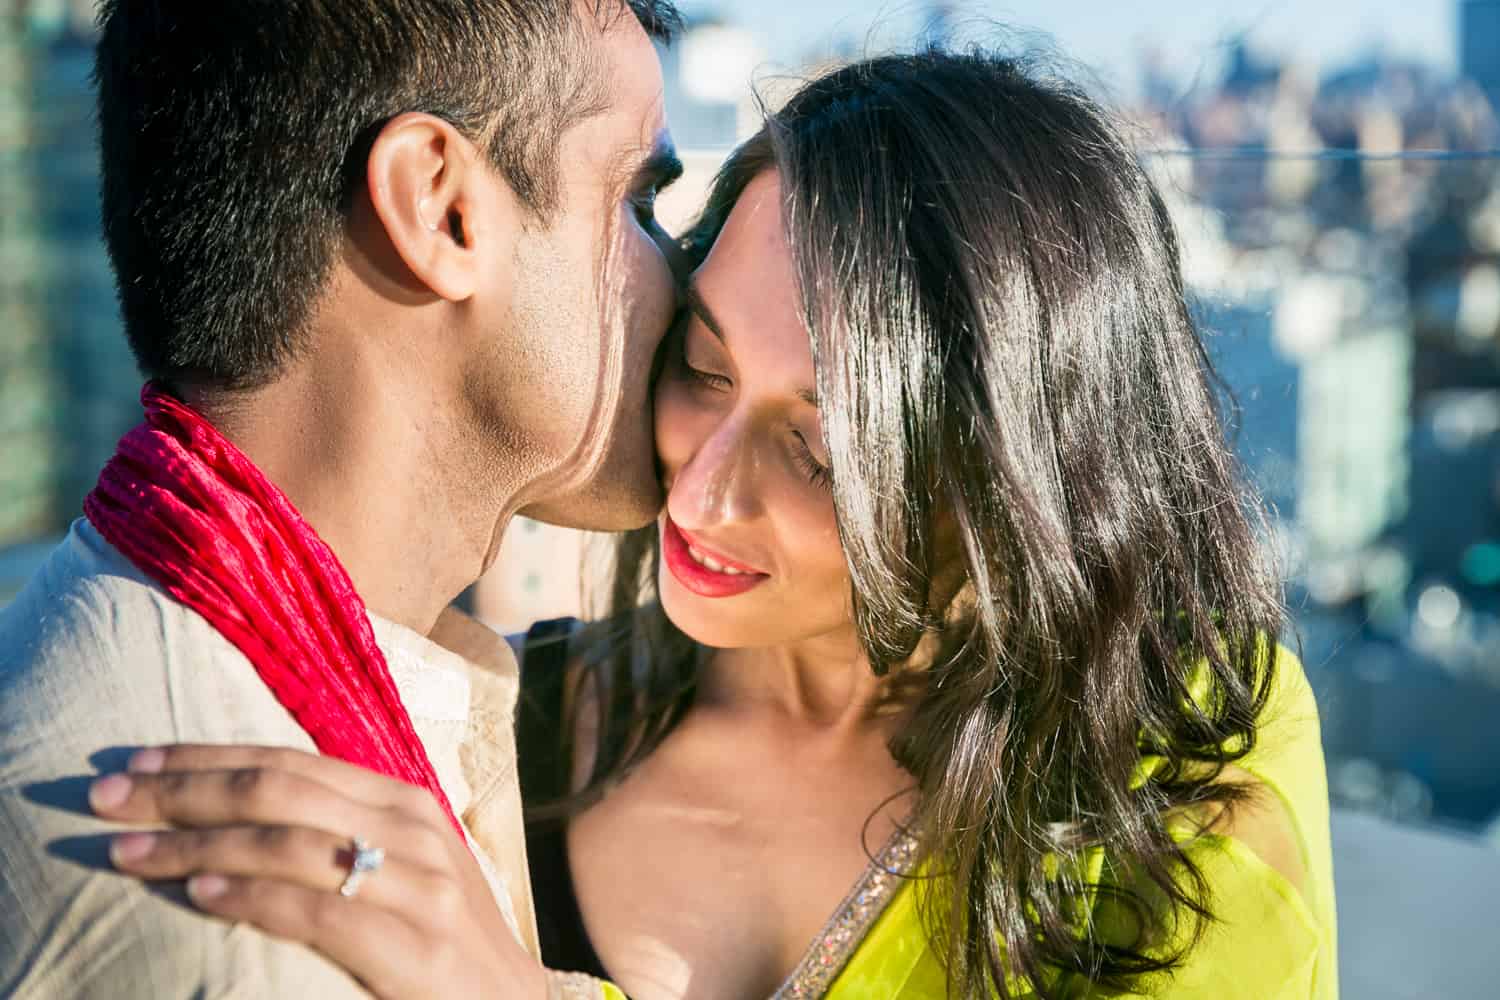 Couple wearing traditional Indian attire and man kissing woman on side of head